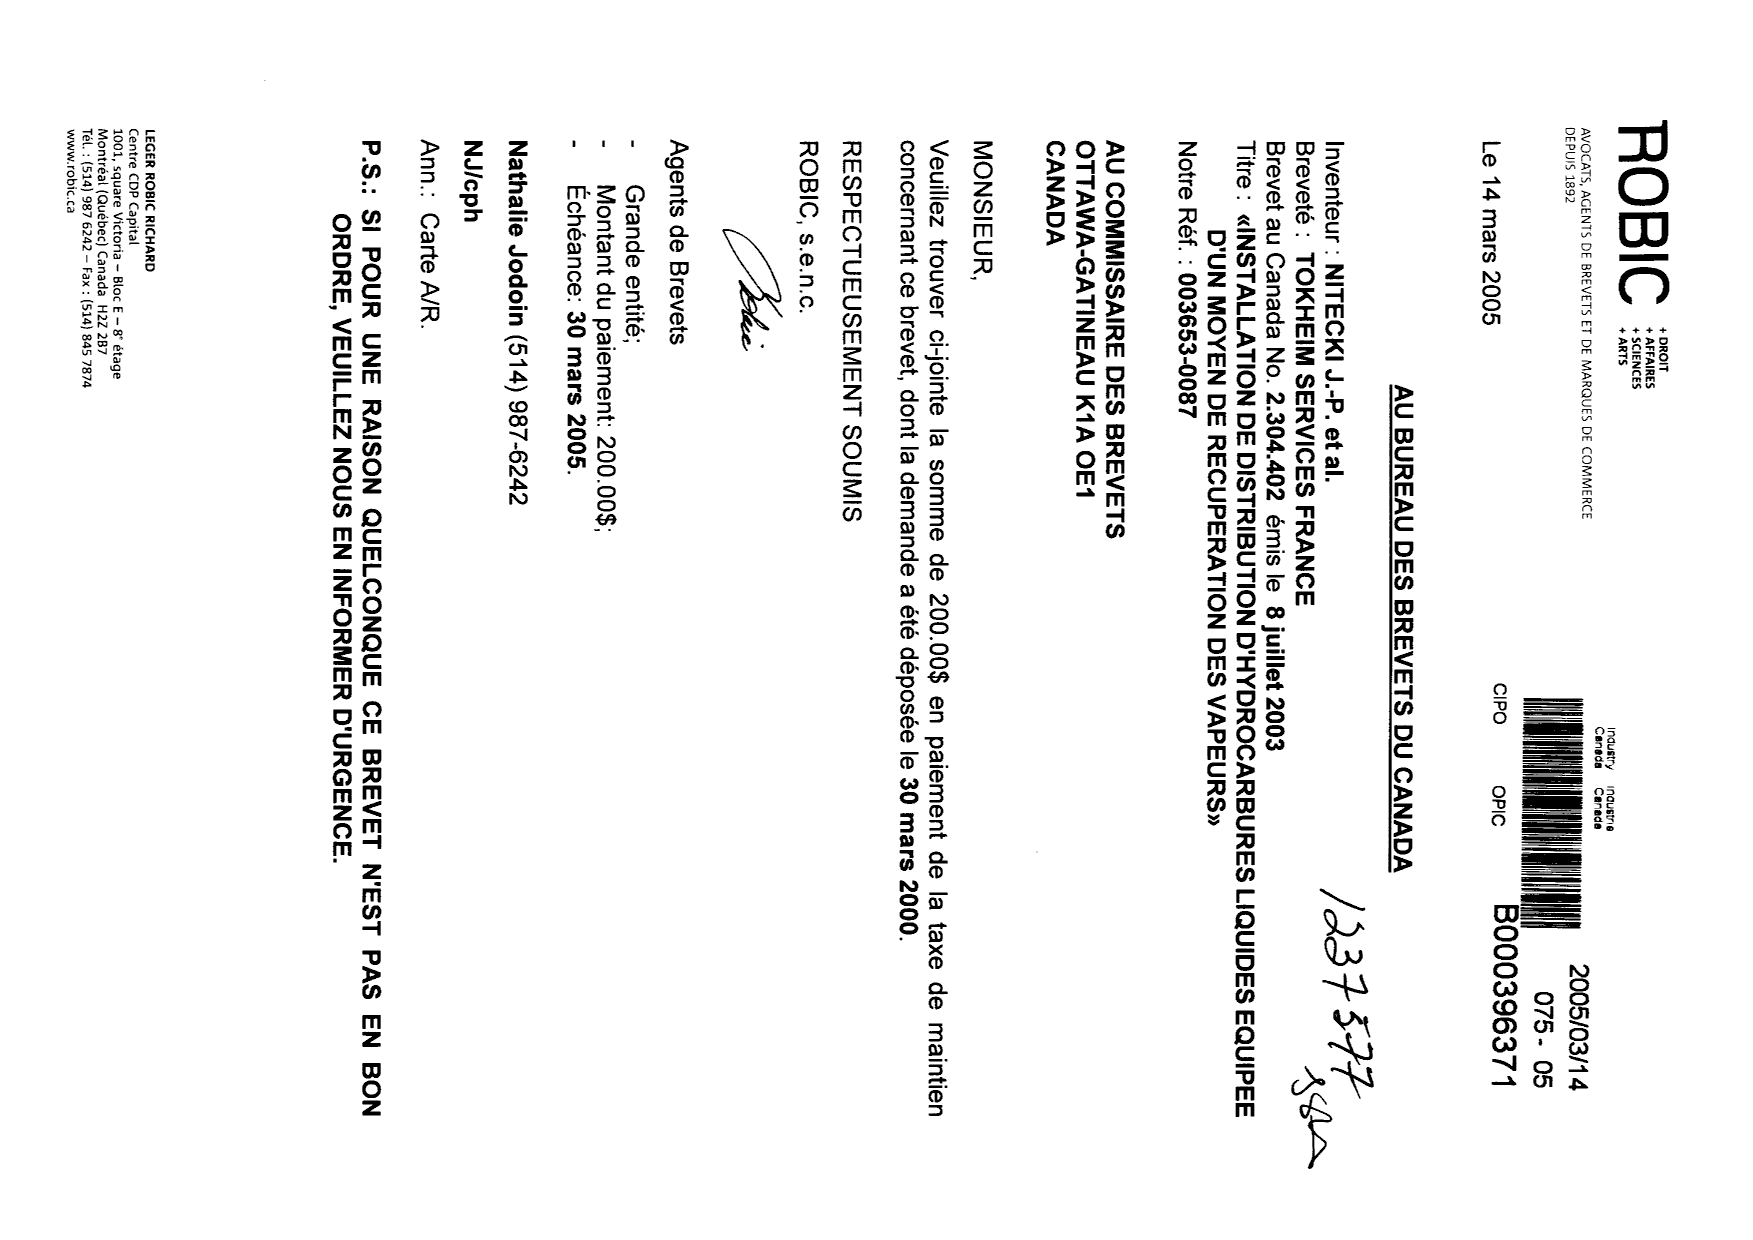 Canadian Patent Document 2304402. Fees 20050314. Image 1 of 1